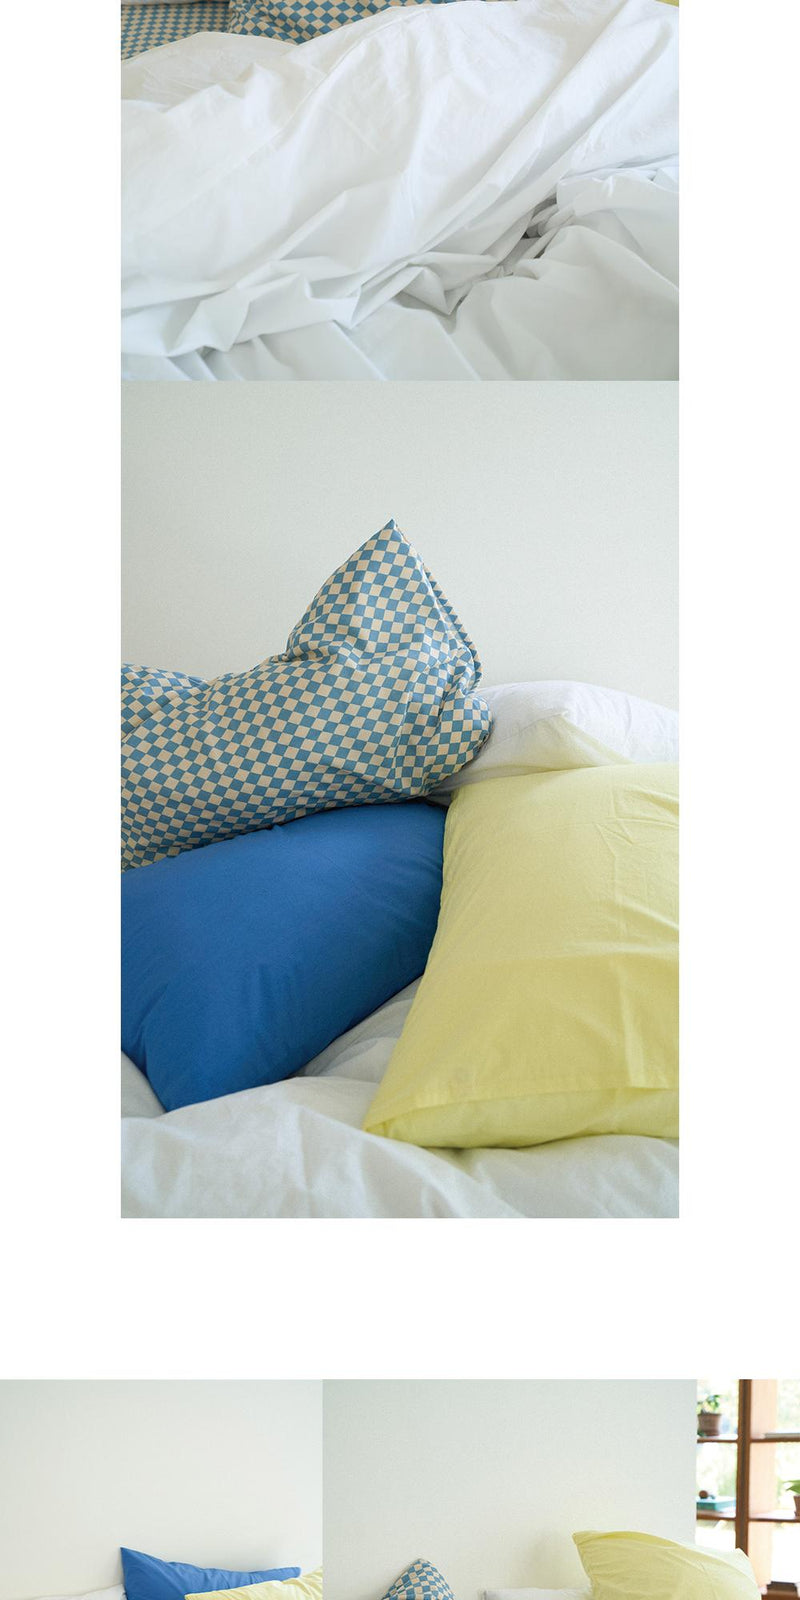 Light Checkers Pillow Cover